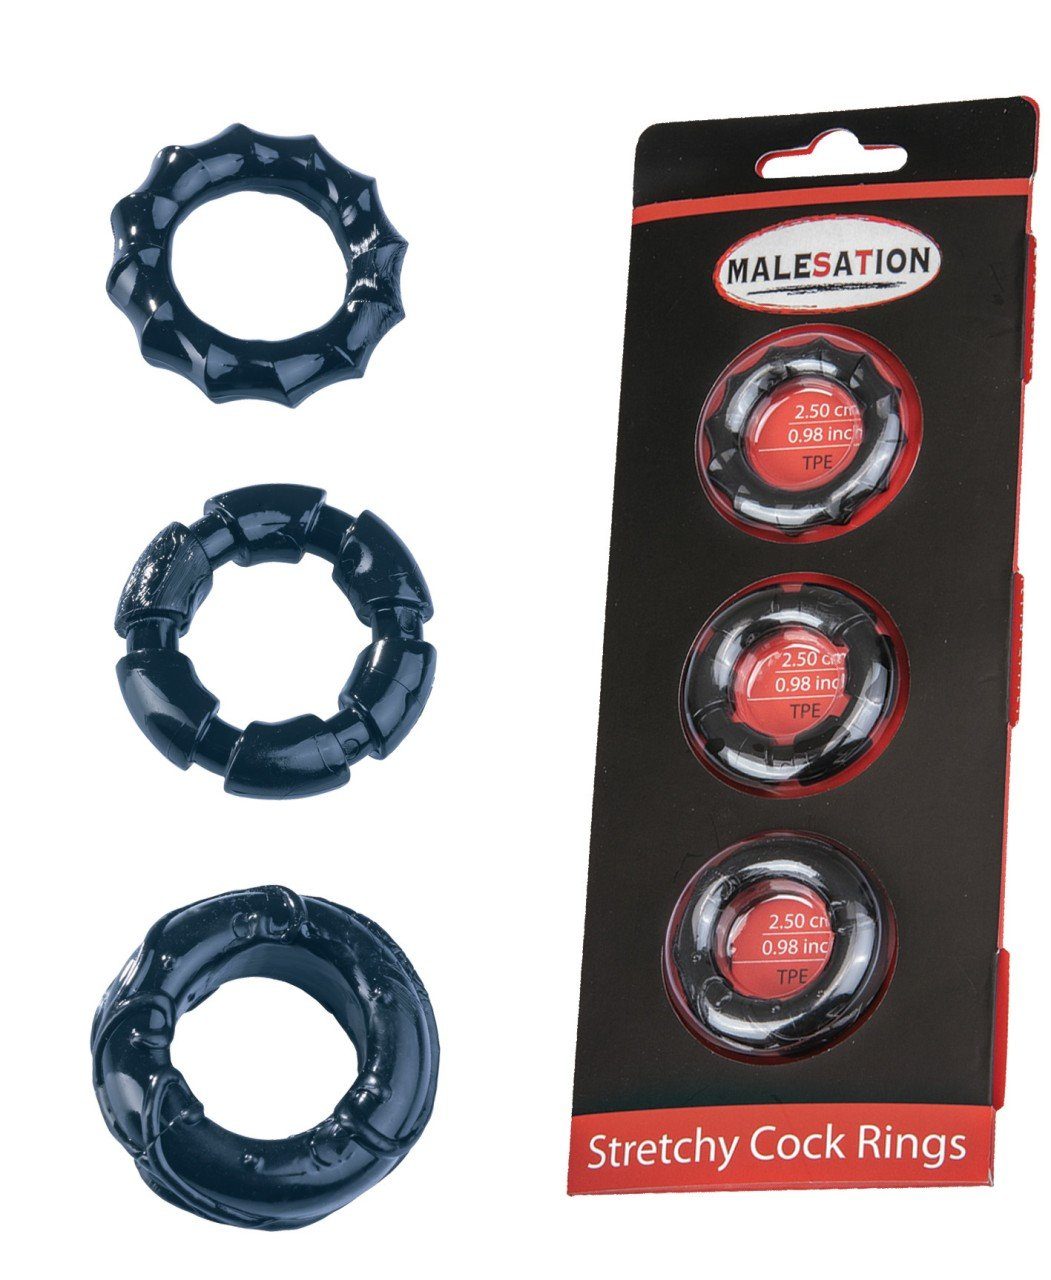 Malesation Penisring MALESATION Stretchy Cock Rings